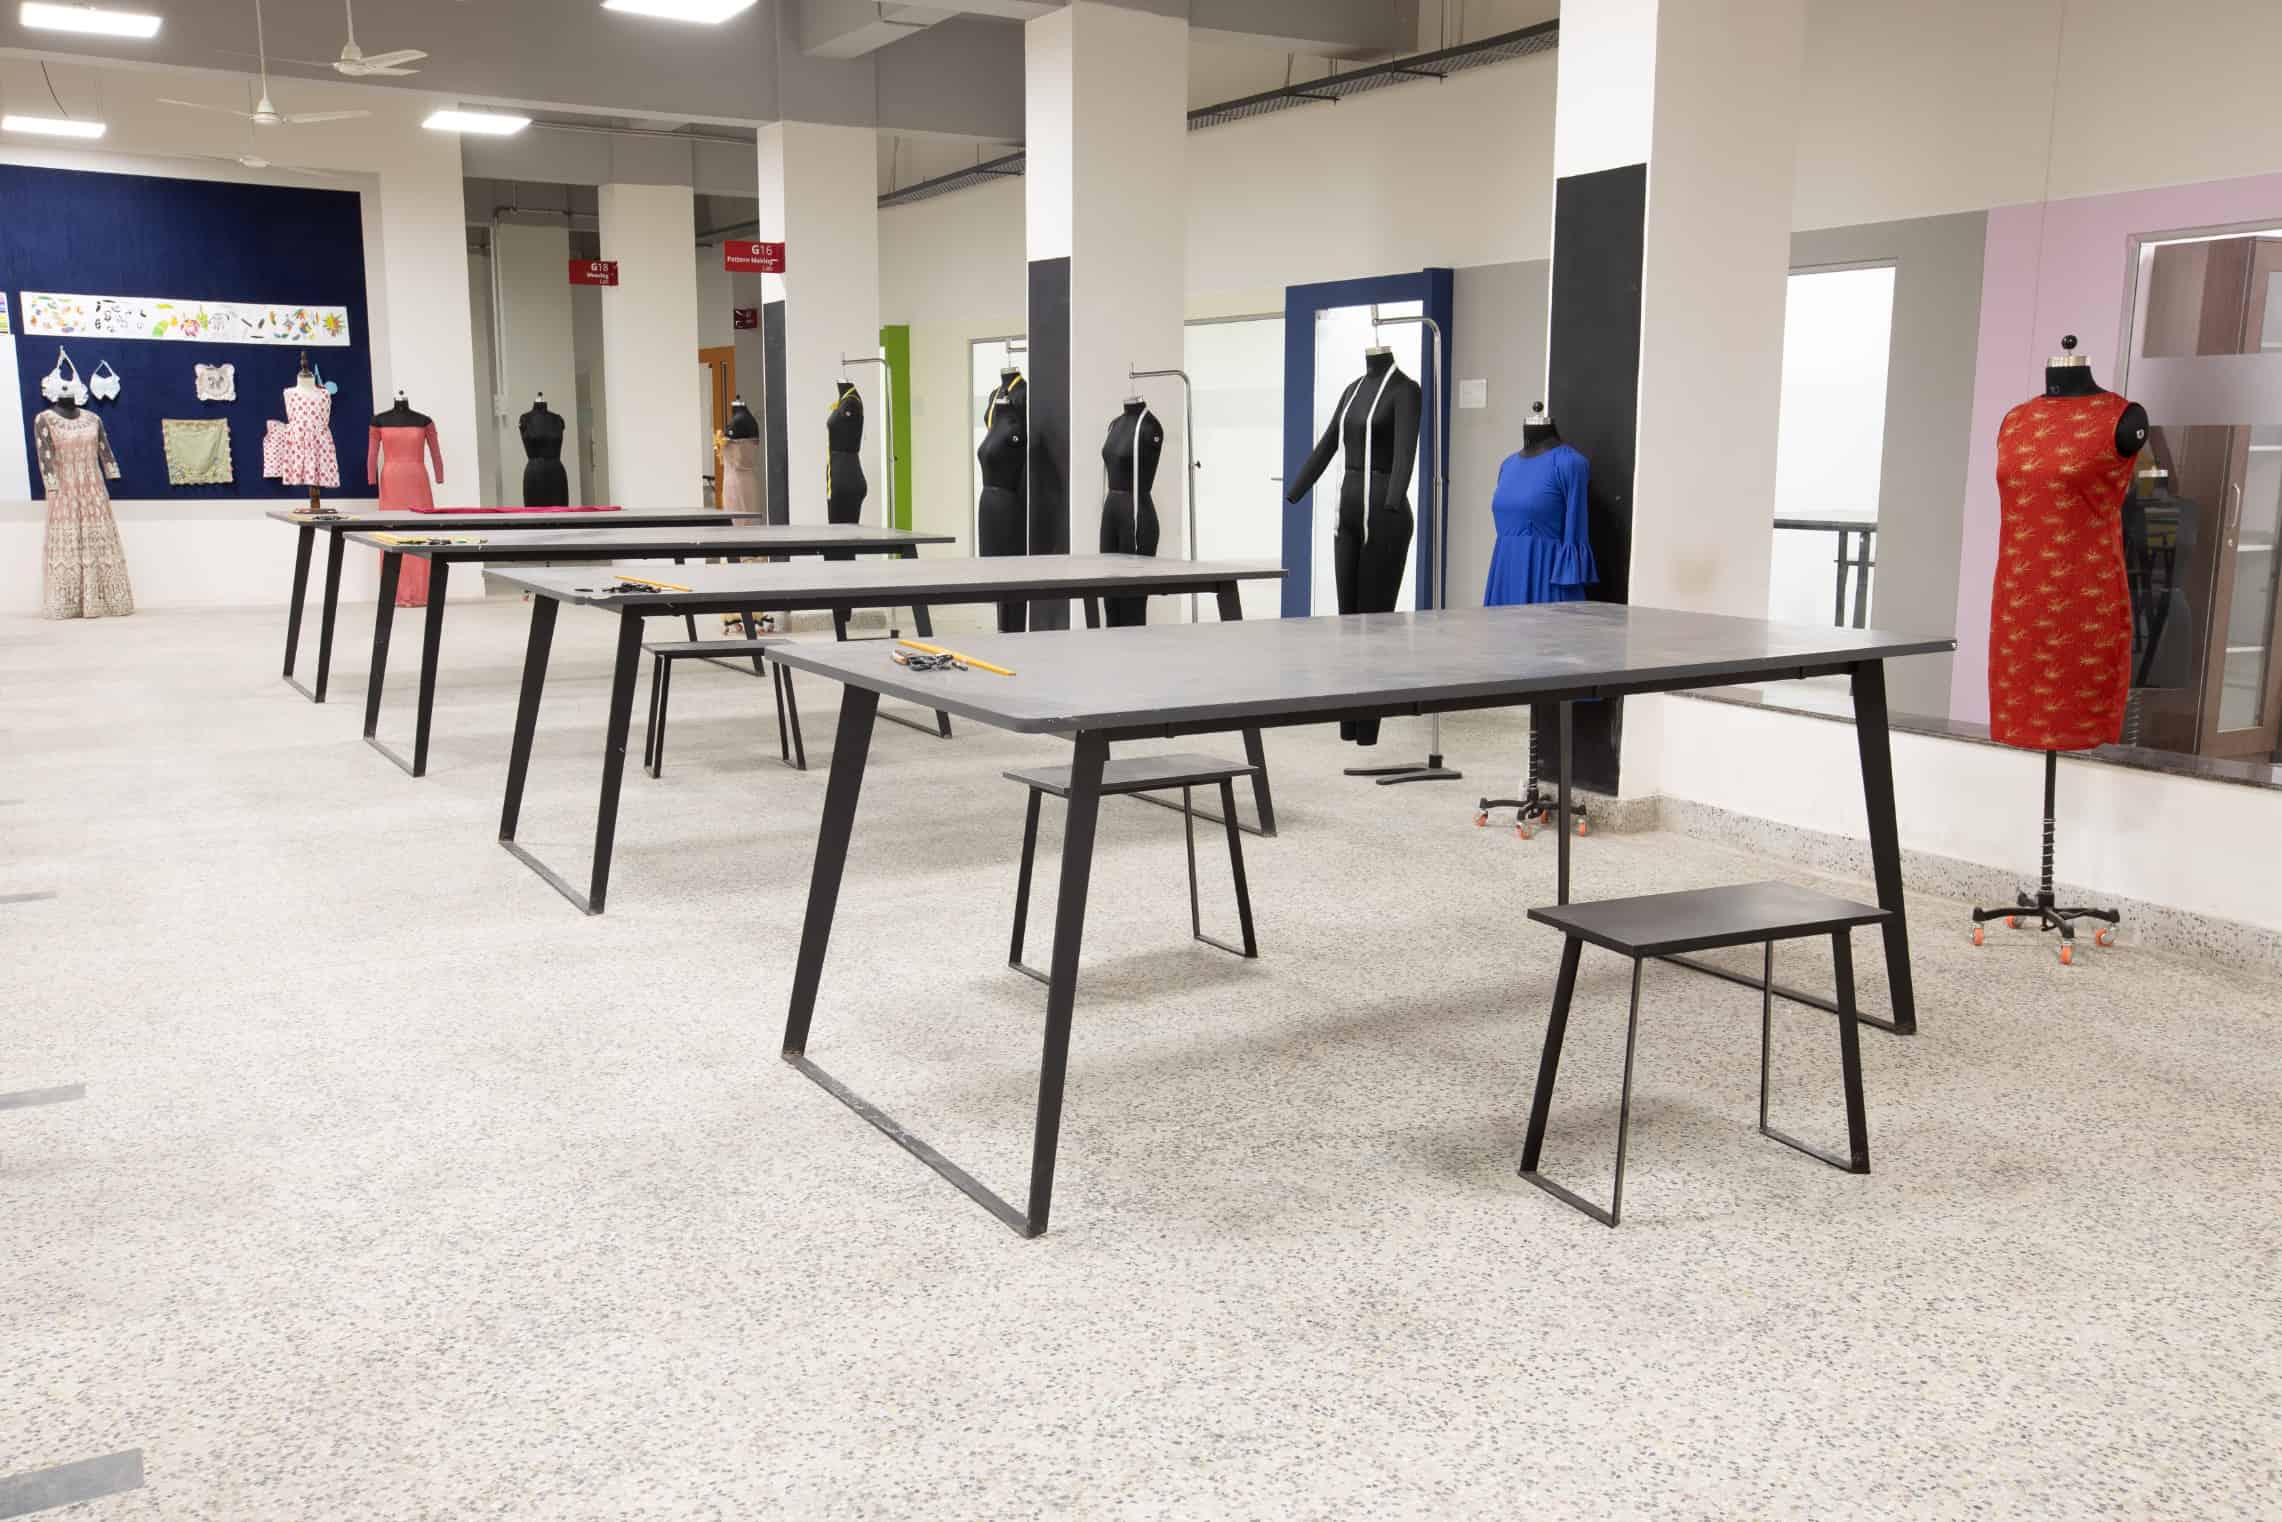 Fashion design studio room with large fabric cutting table at a design college in Chennai